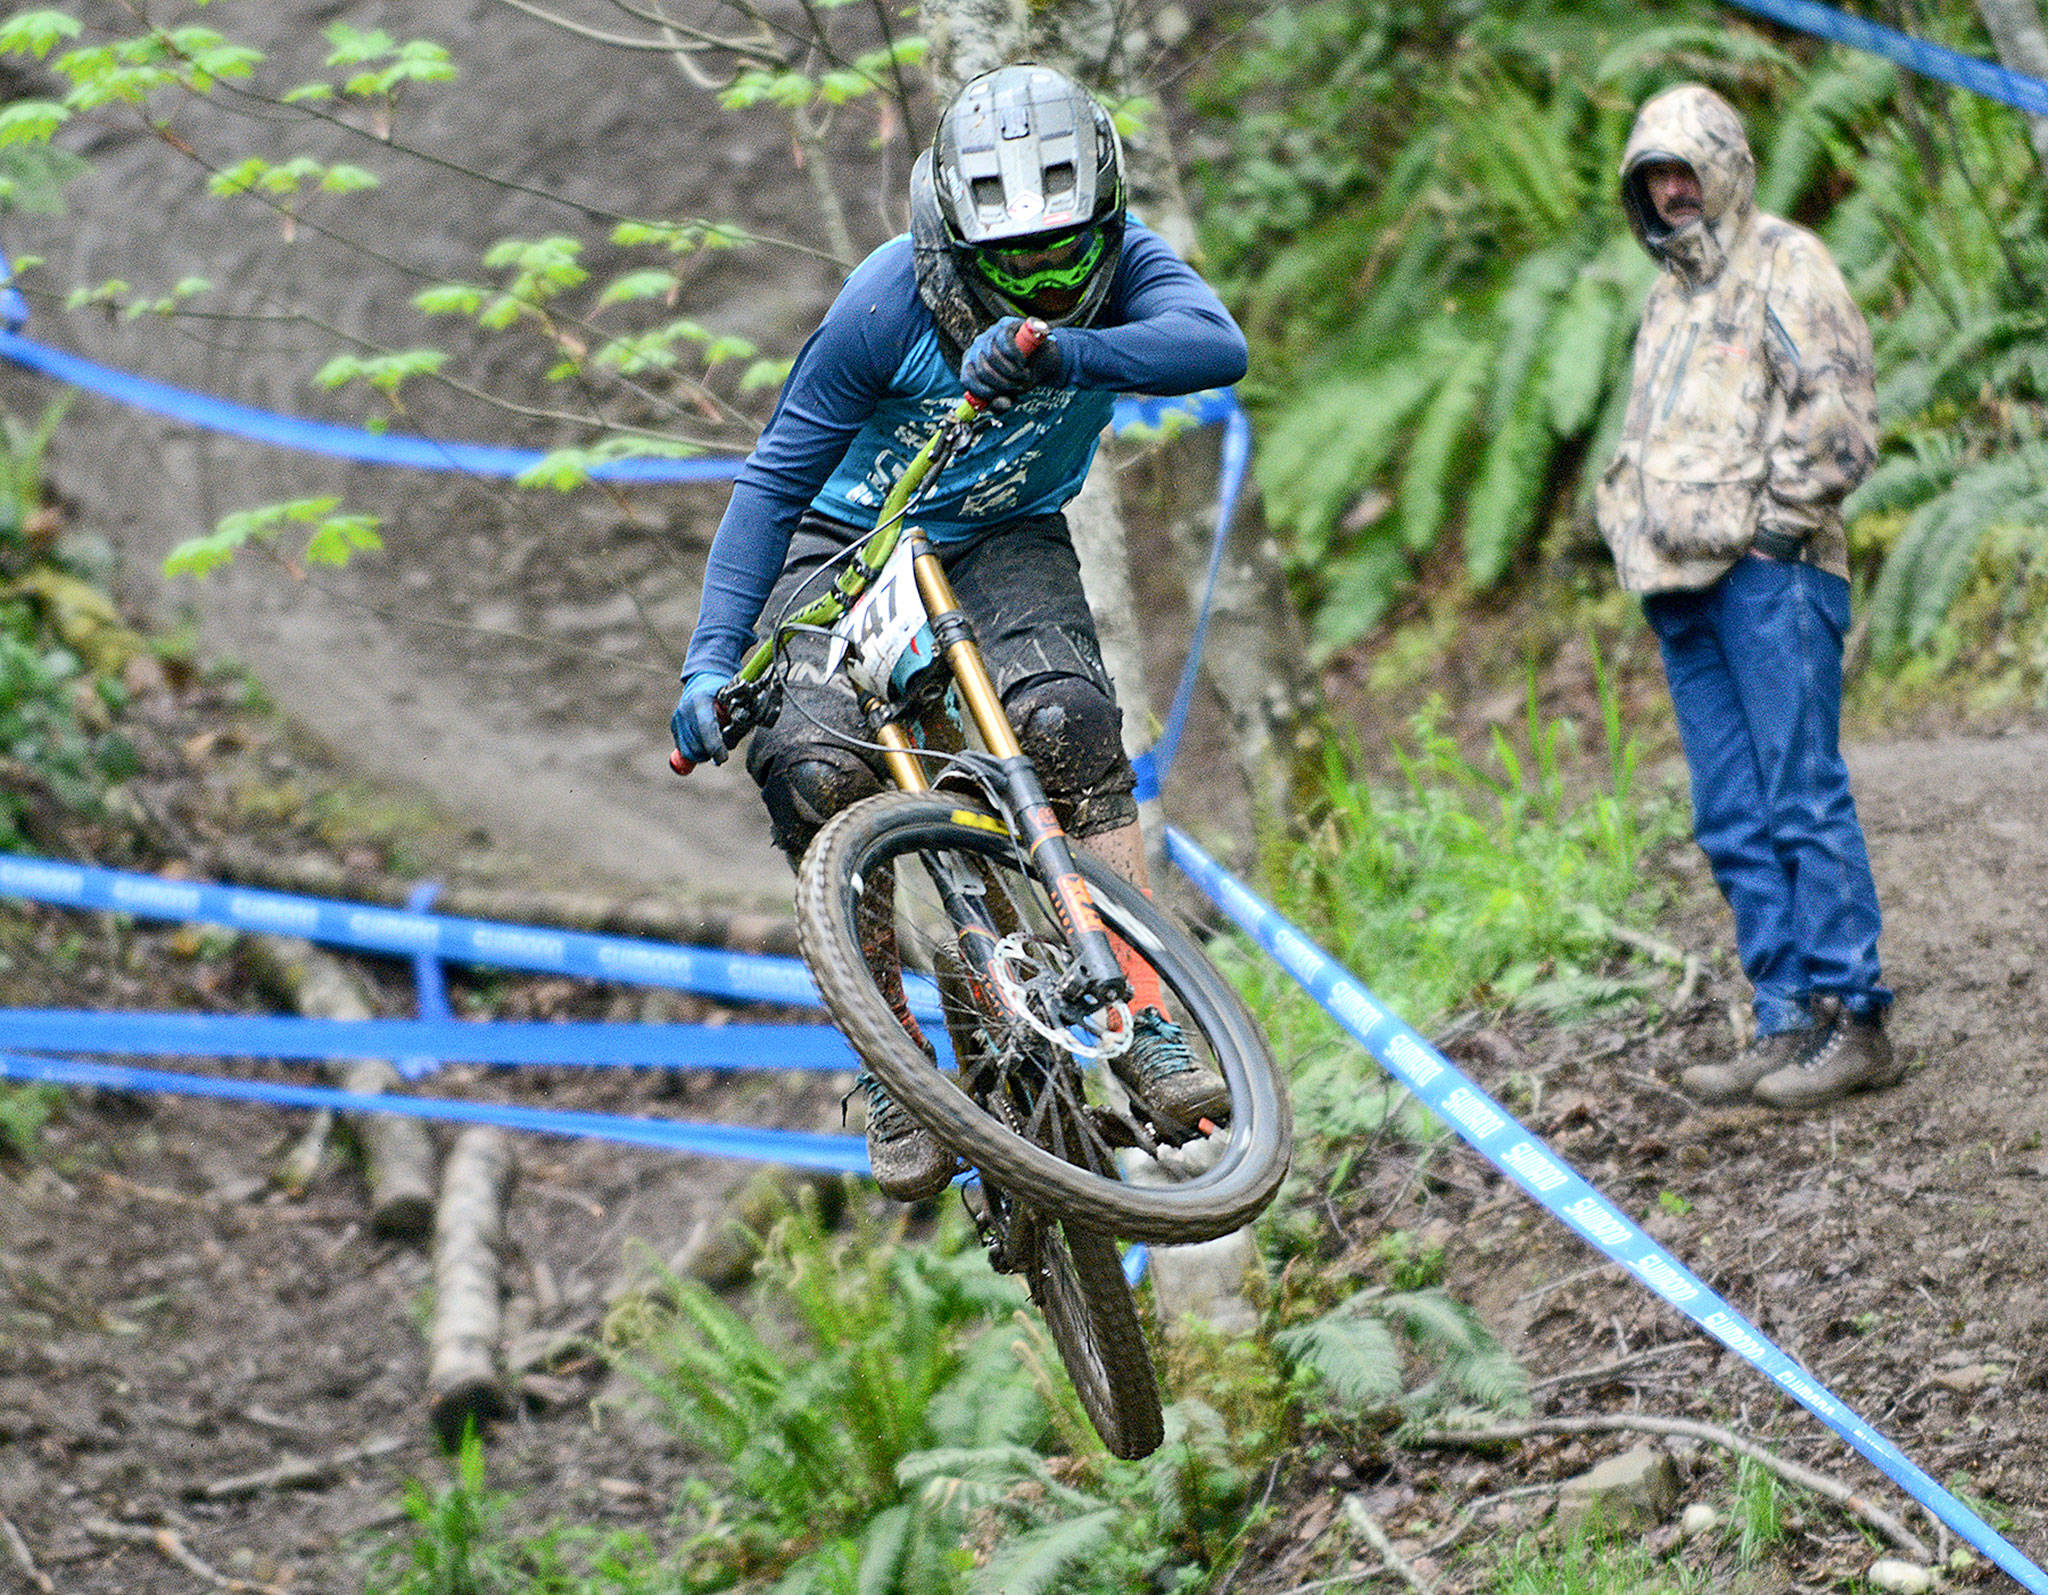 Jesse Major/Peninsula Daily News Cole Townsend of Mukilteo gets some air while riding in the Northwest Cup downhill mountain bike races at Dry Hill Sunday. Townsend came in 10th in the Cat 1 Men’s 19-29 division.